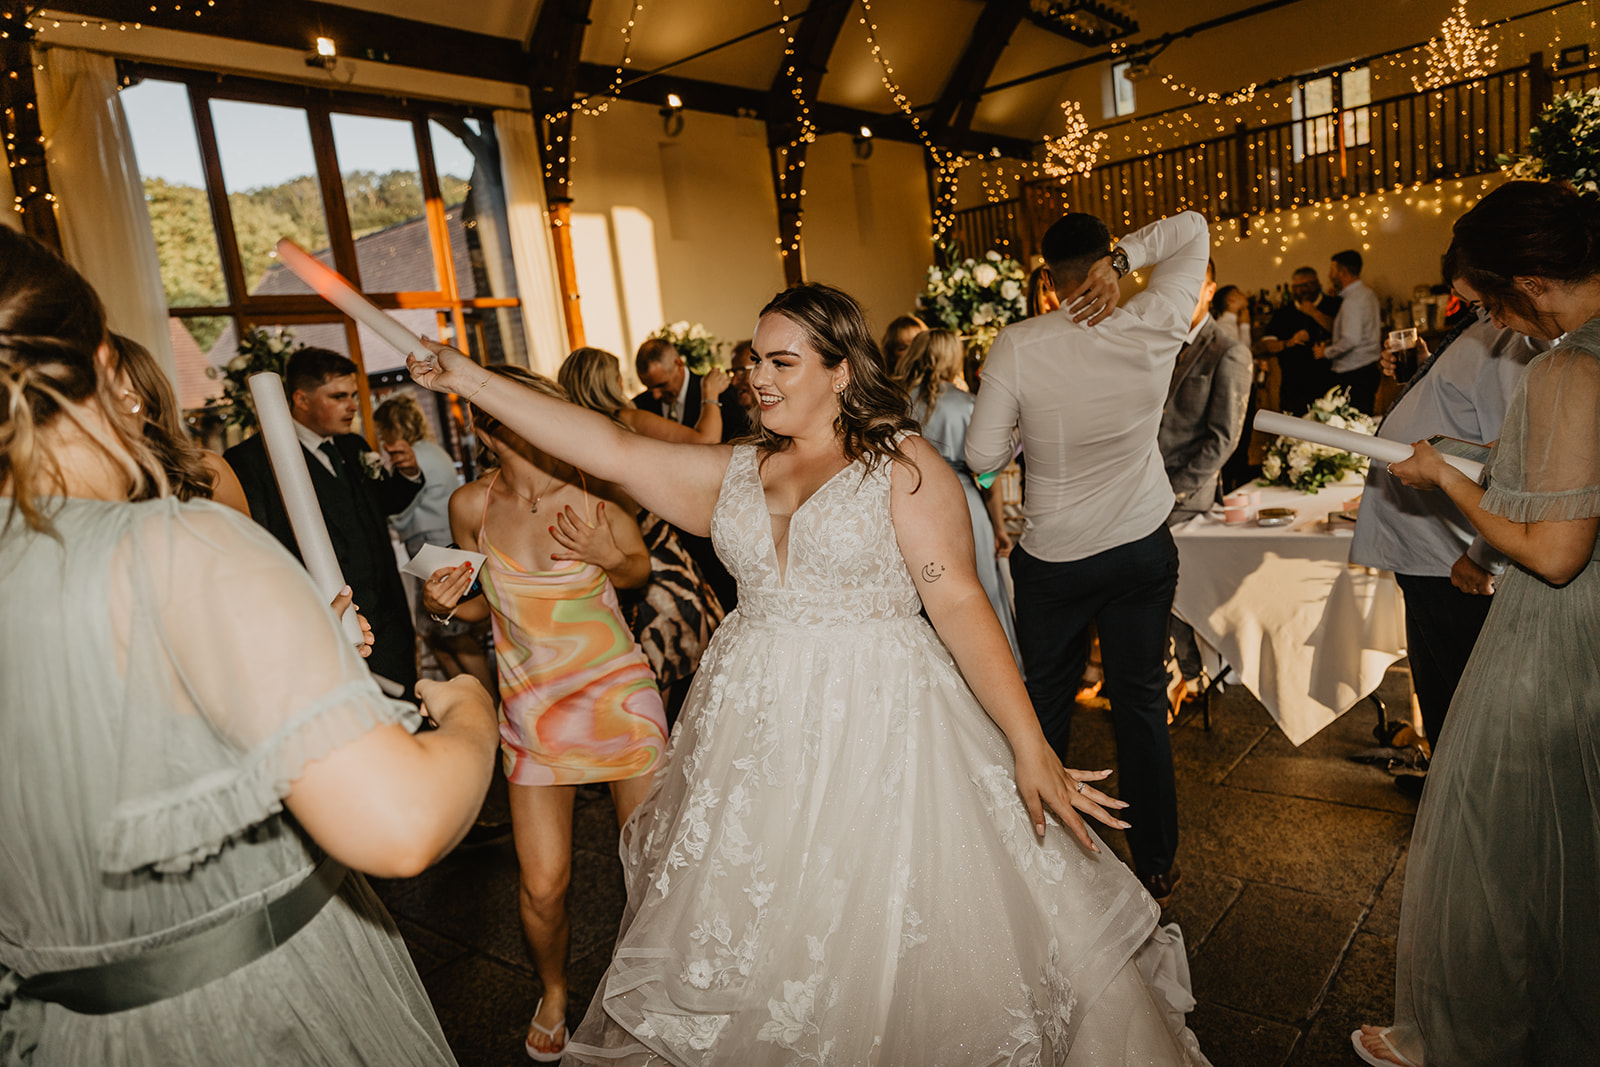 Bride and Groom dance at a Long Furlong Barn Wedding in Worthing, Sussex. By Olive Joy Photography.